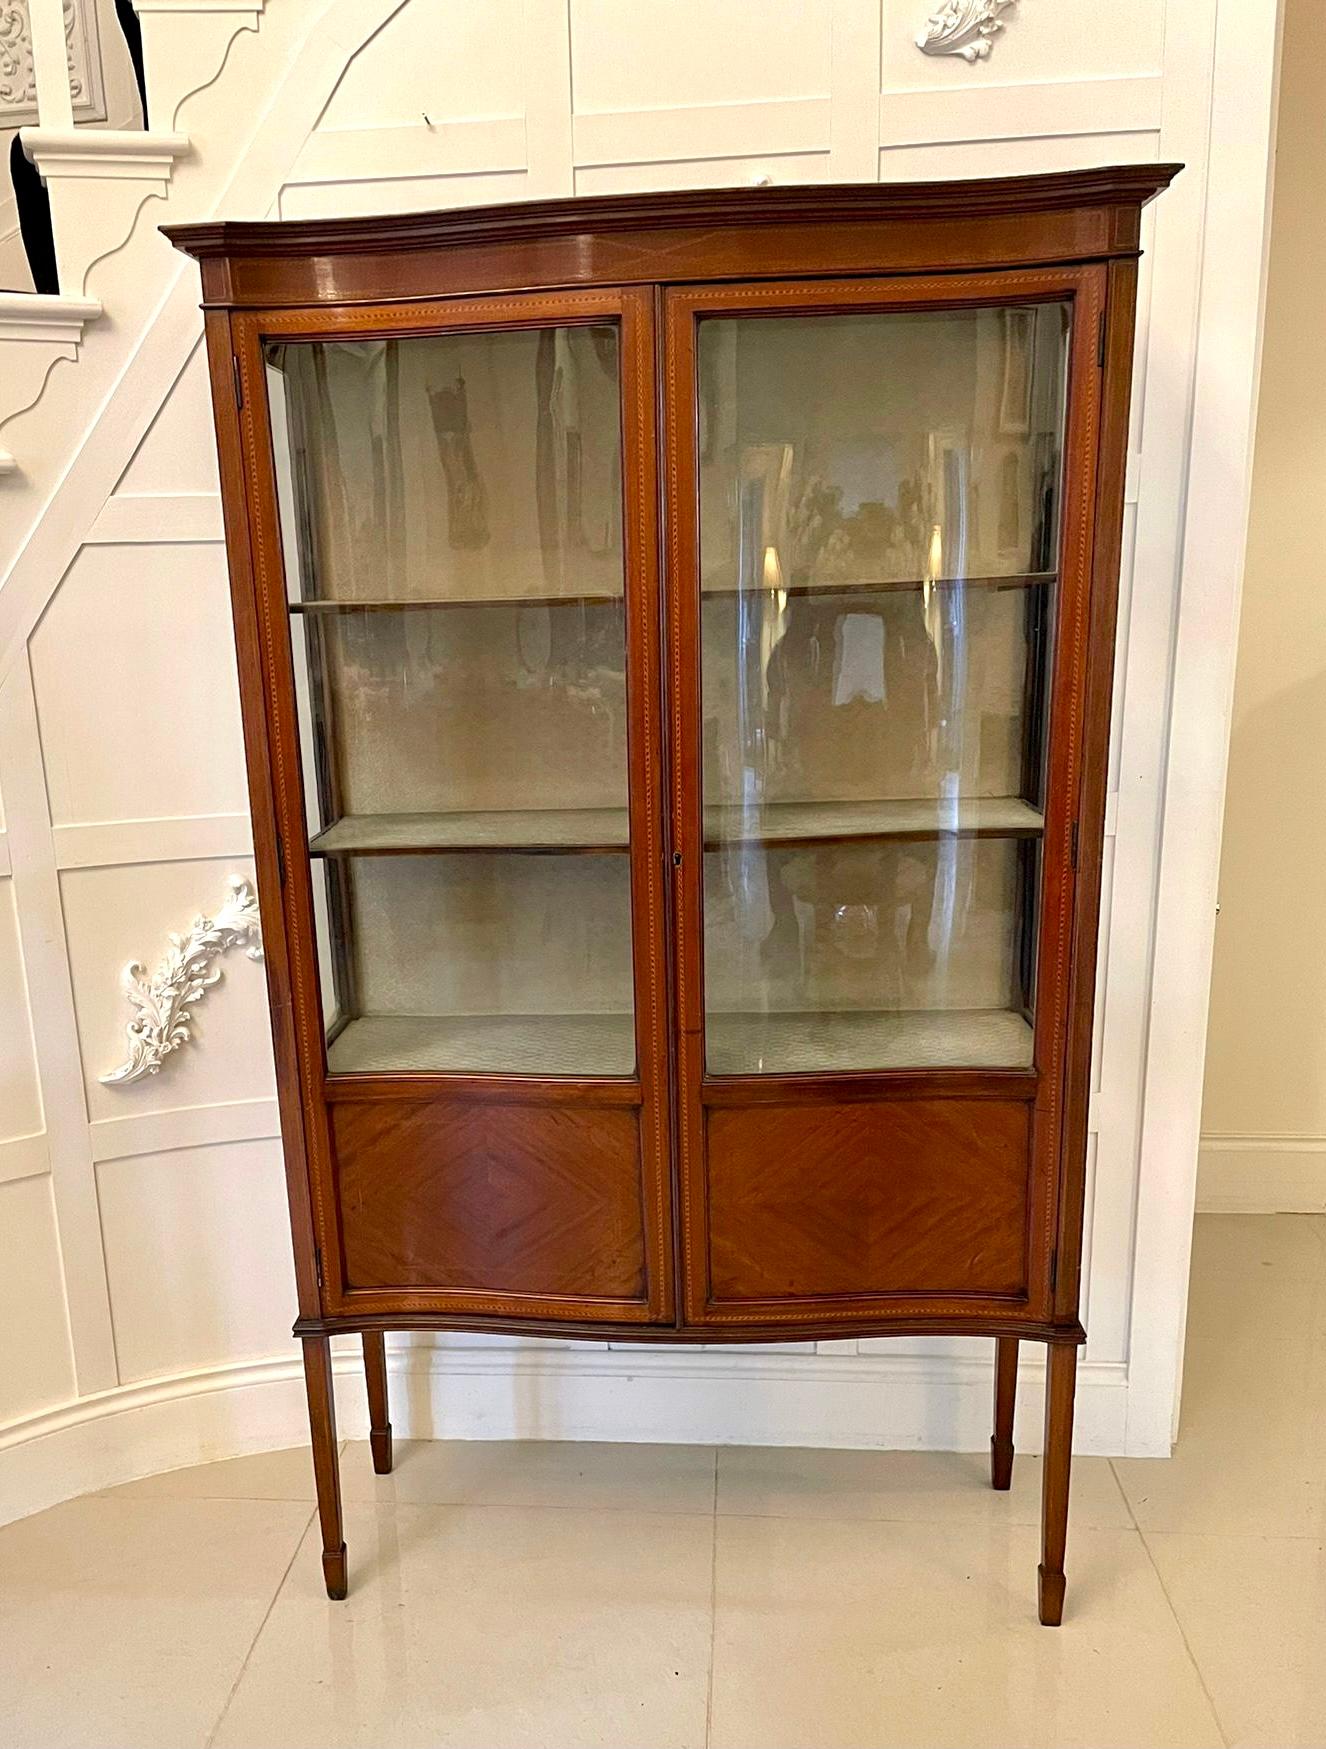 Antique Edwardian quality mahogany inlaid serpentine front display cabinet having a quality mahogany shaped cornice, mahogany inlaid frieze above a pair of pretty serpentine shaped glazed and mahogany inlaid doors opening to reveal three fabric